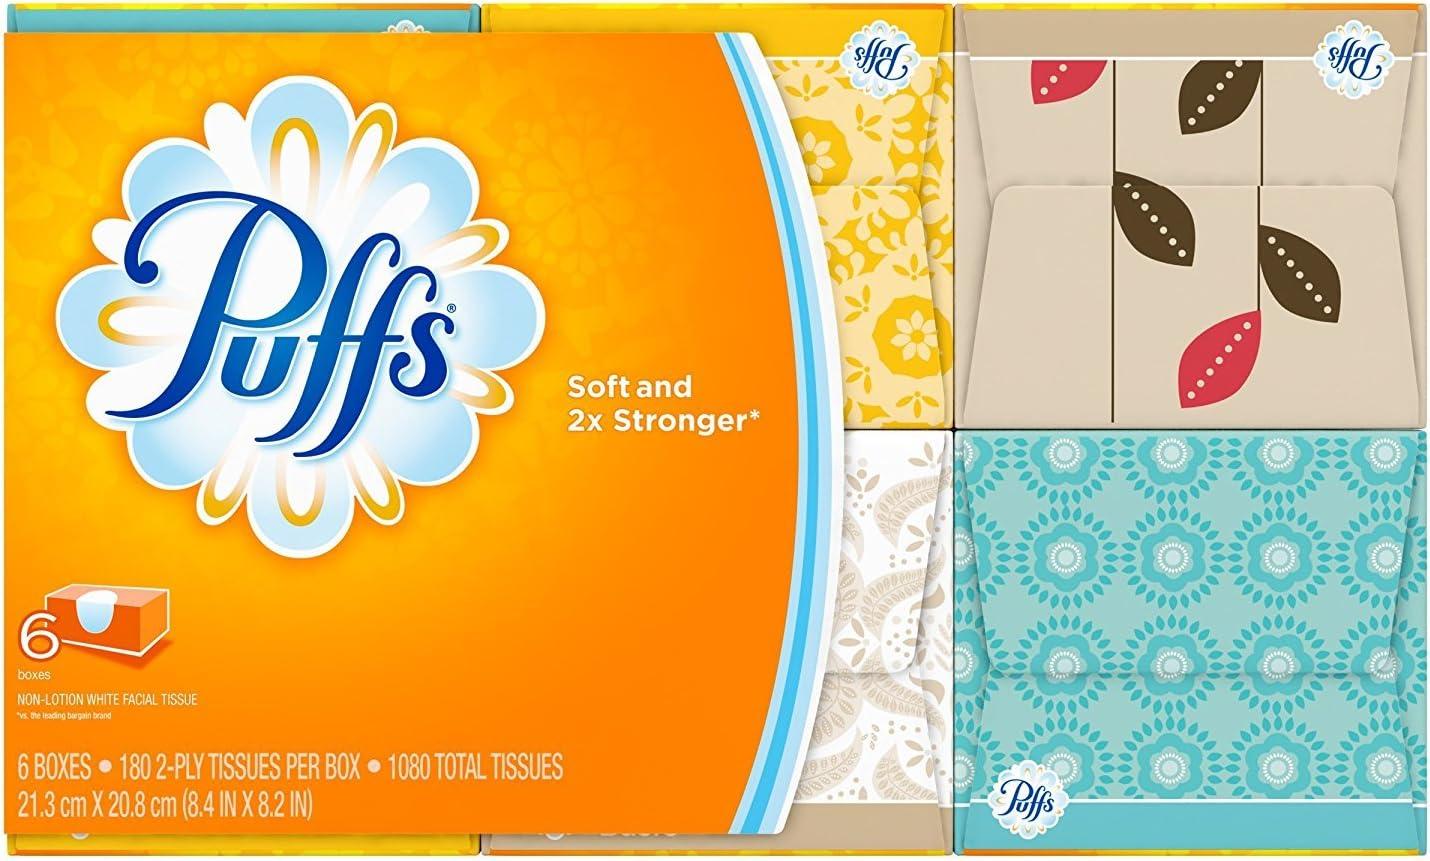 Puffs Plus Lotion Facial Tissues on Sale (Great for Back to School!)